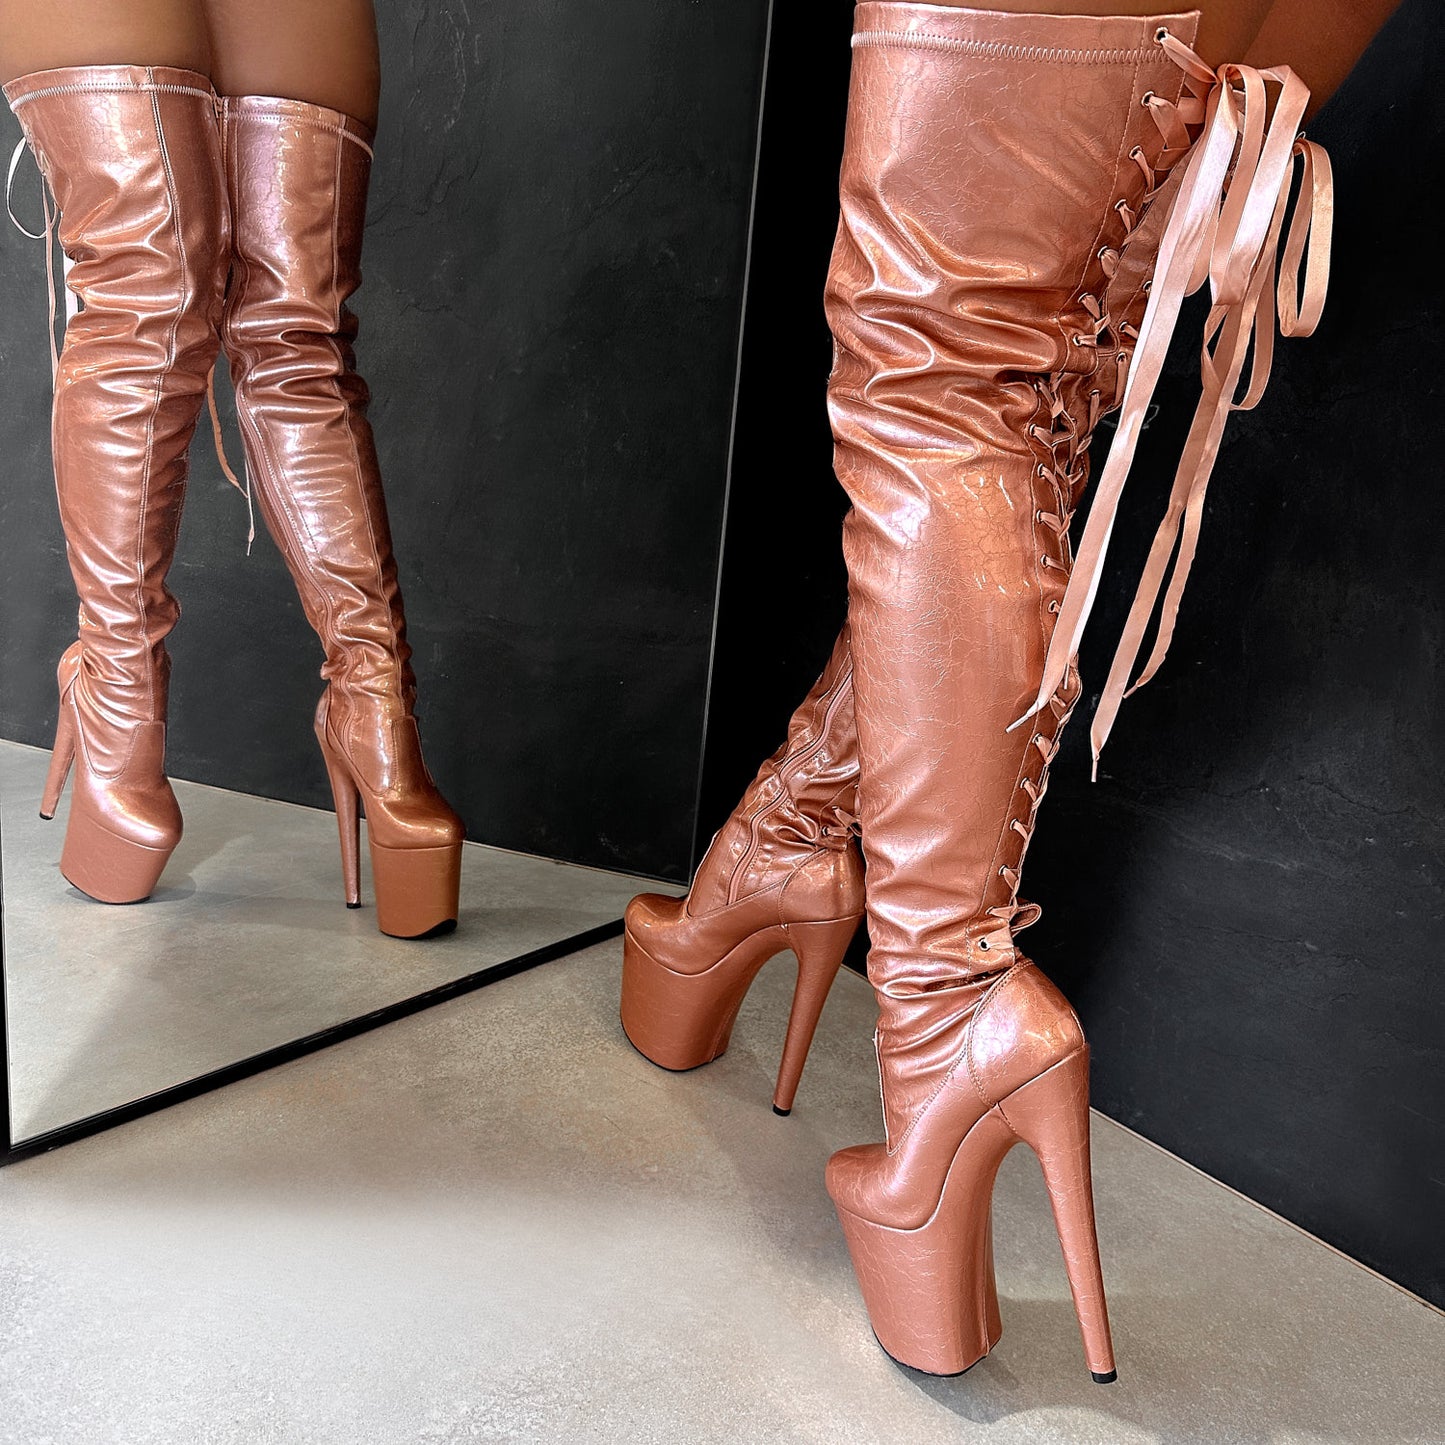 Heartbreaker - Rose Gold Thicc Thigh High - 8 INCH